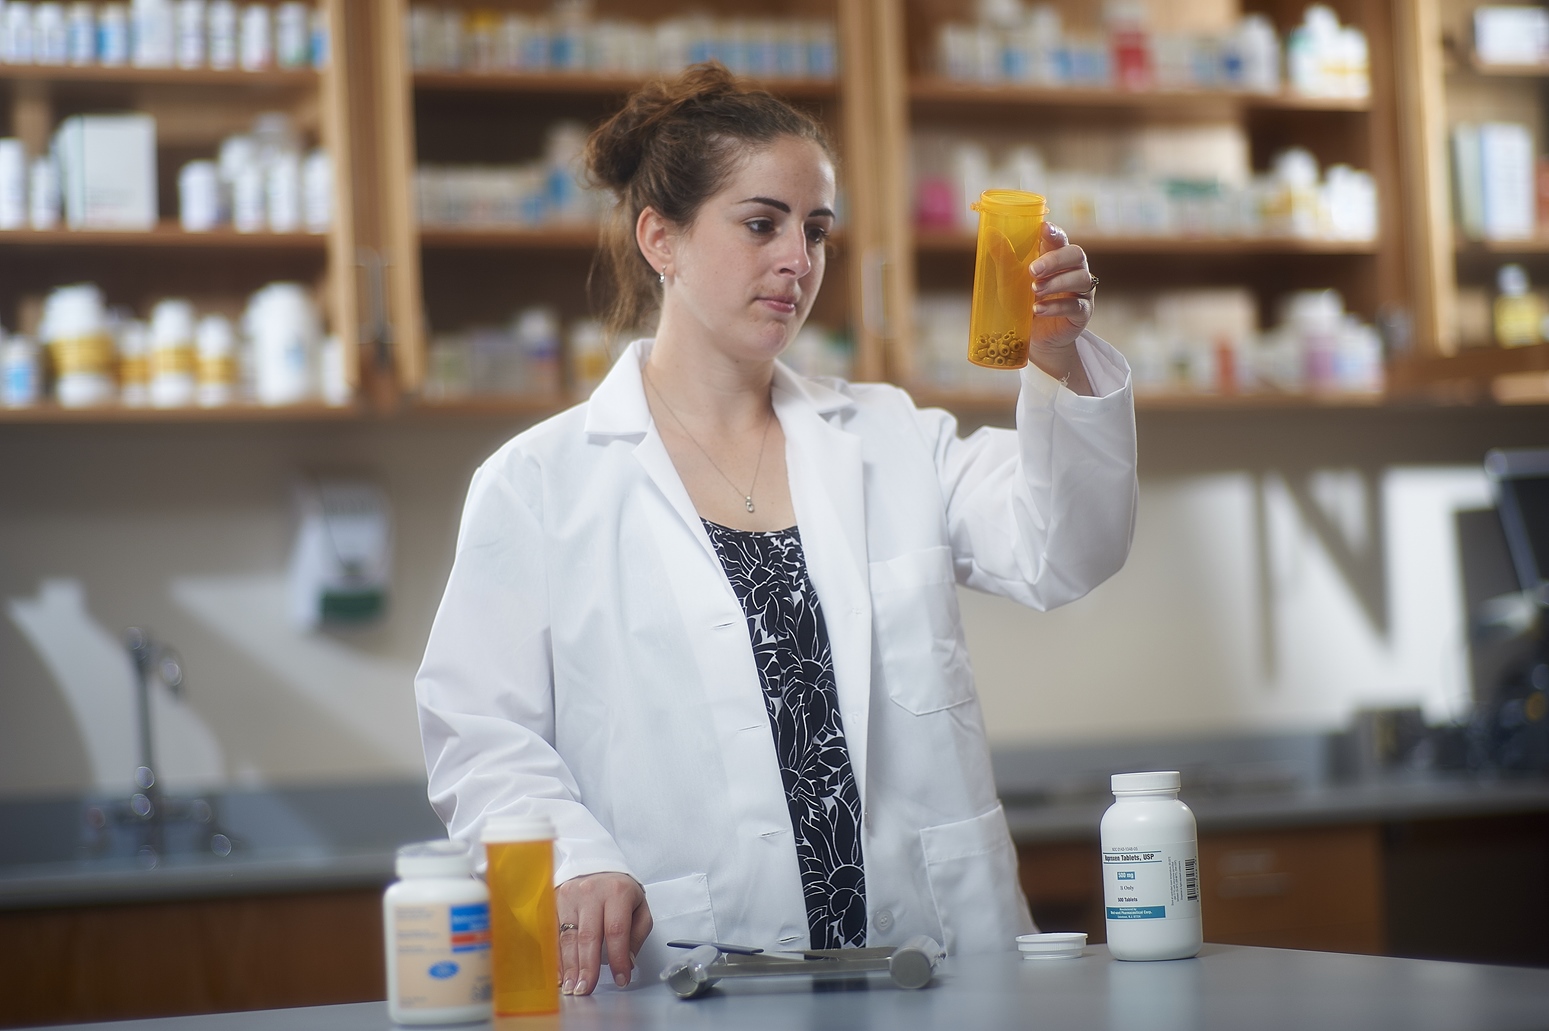 In addition to retail environments, those with a Husson University Pharm.D. degree can also work in hospitals, research laboratories and other healthcare facilities as research pharmacists.